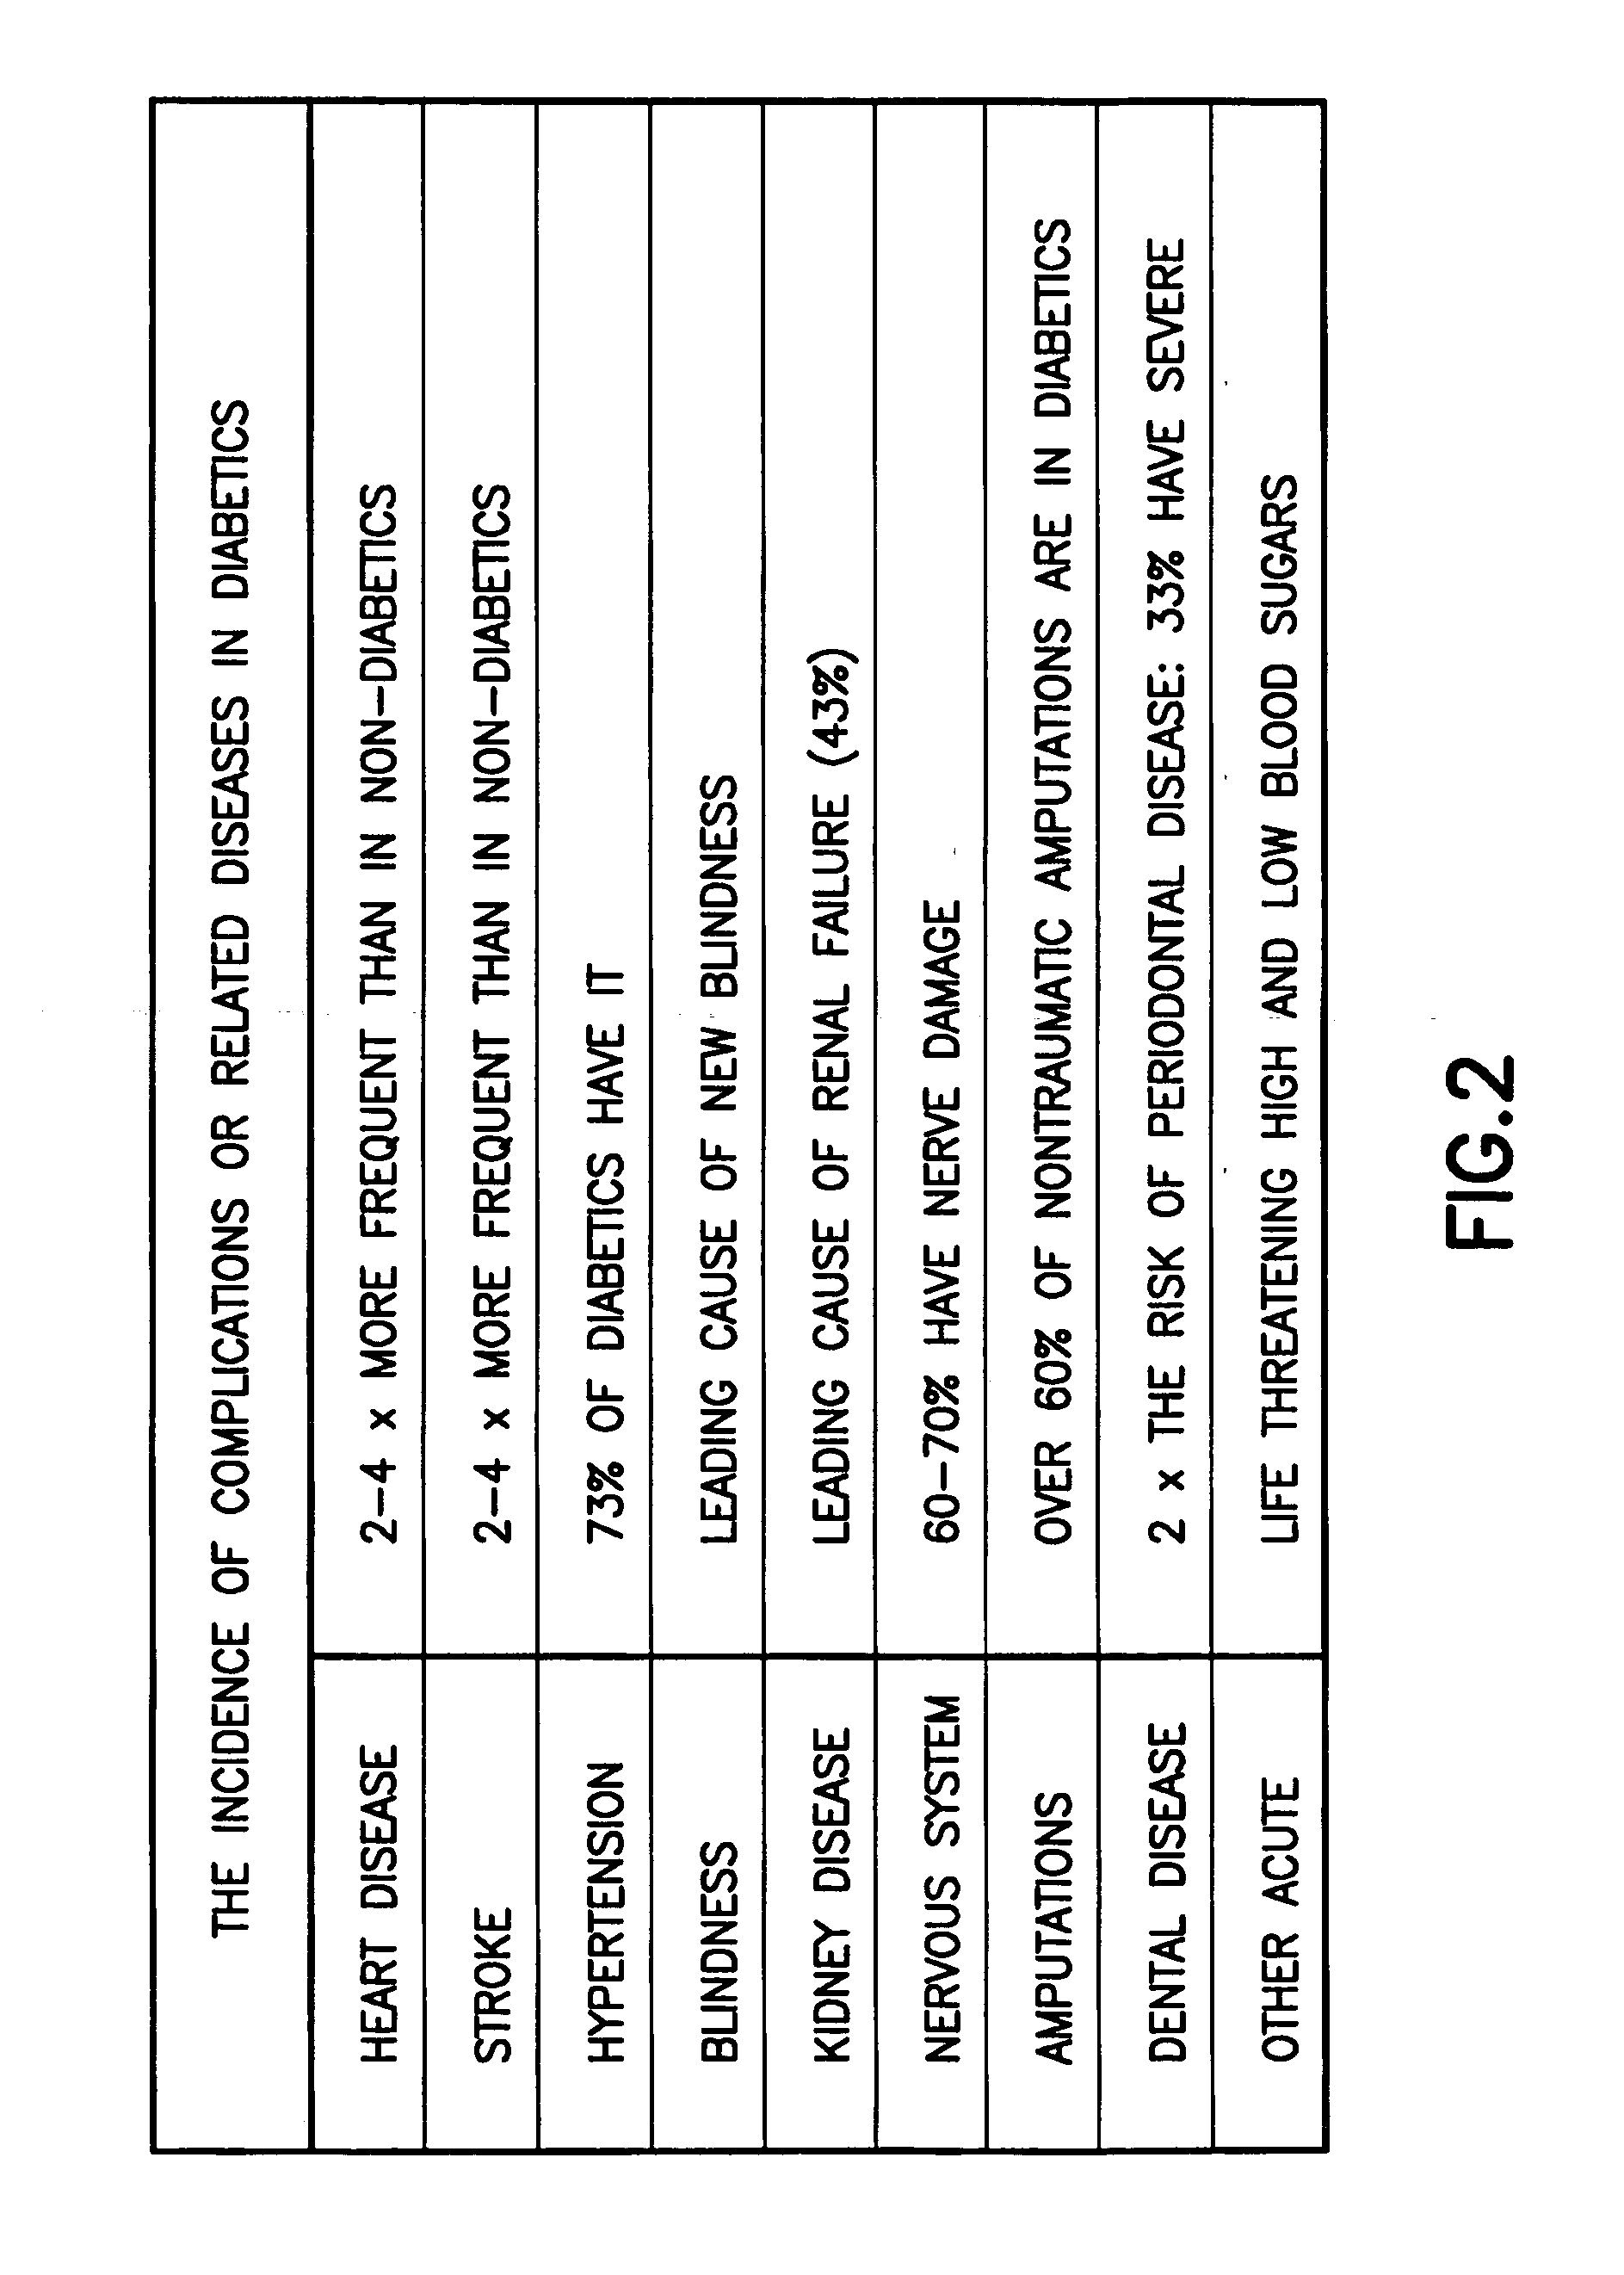 Method and apparatus for real time predictive modeling for chronically ill patients